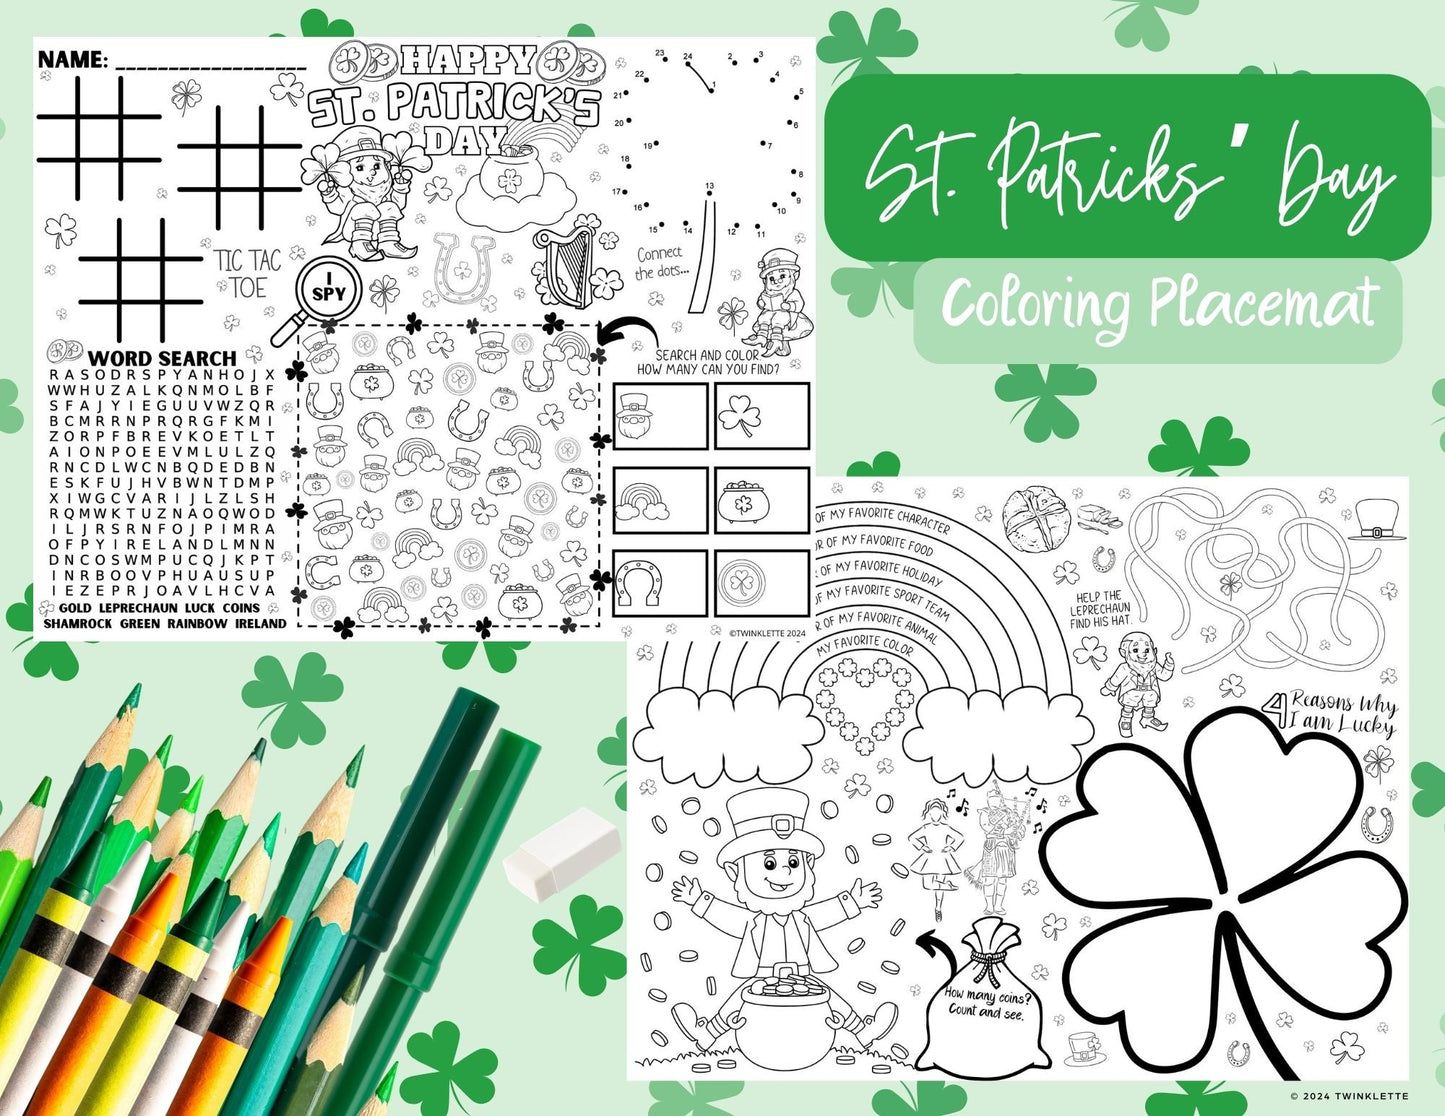 St. Patrick's Day Coloring Placemat with Word Search: 4 Reasons Why I'm Lucky + Bonus Activities - Twinklette